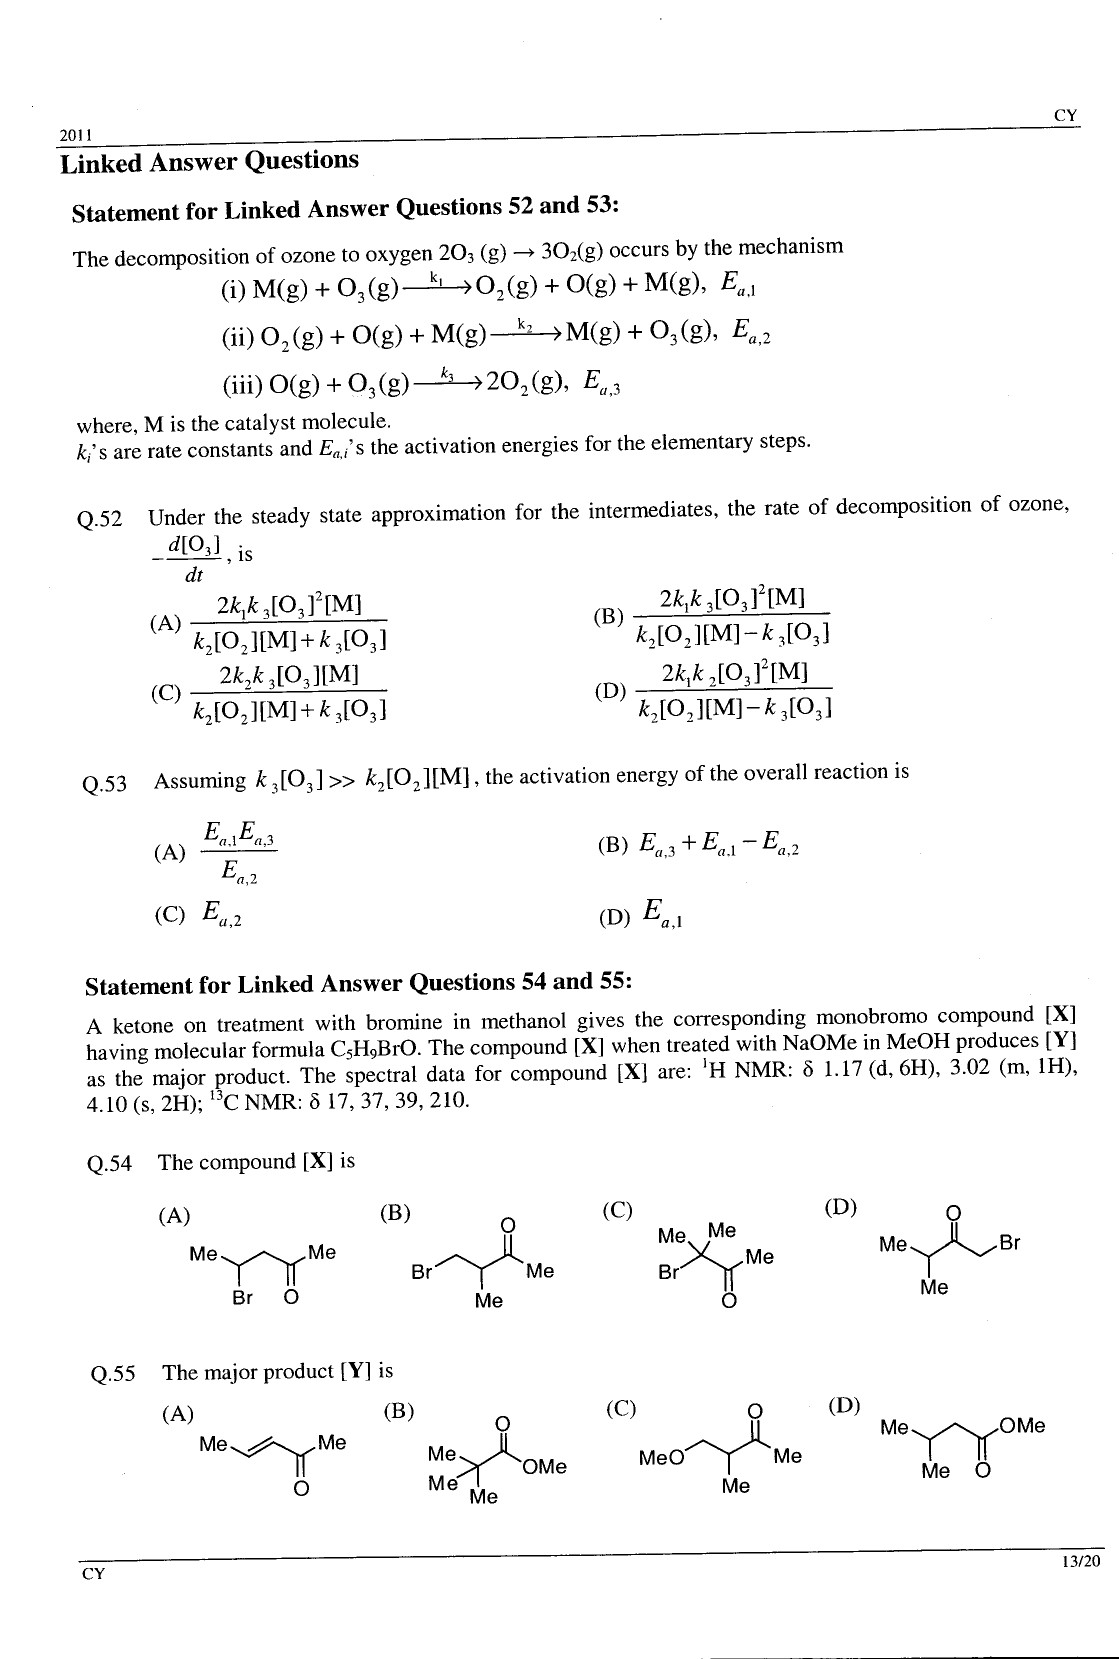 GATE Exam Question Paper 2011 Chemistry 13